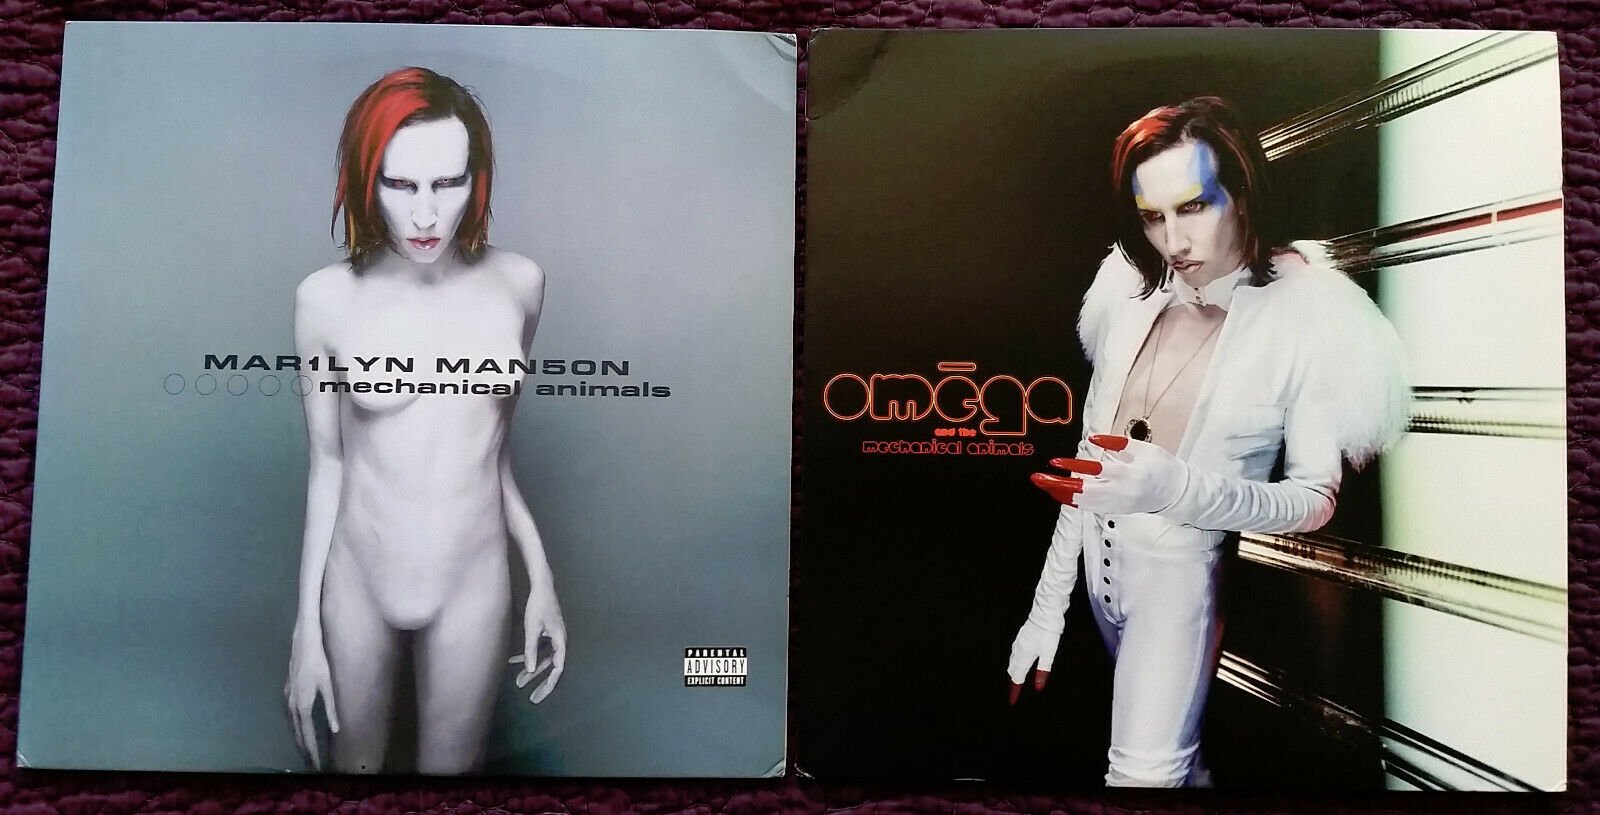 popsike.com - Marilyn Manson - Mechanical Animals Nothing Records